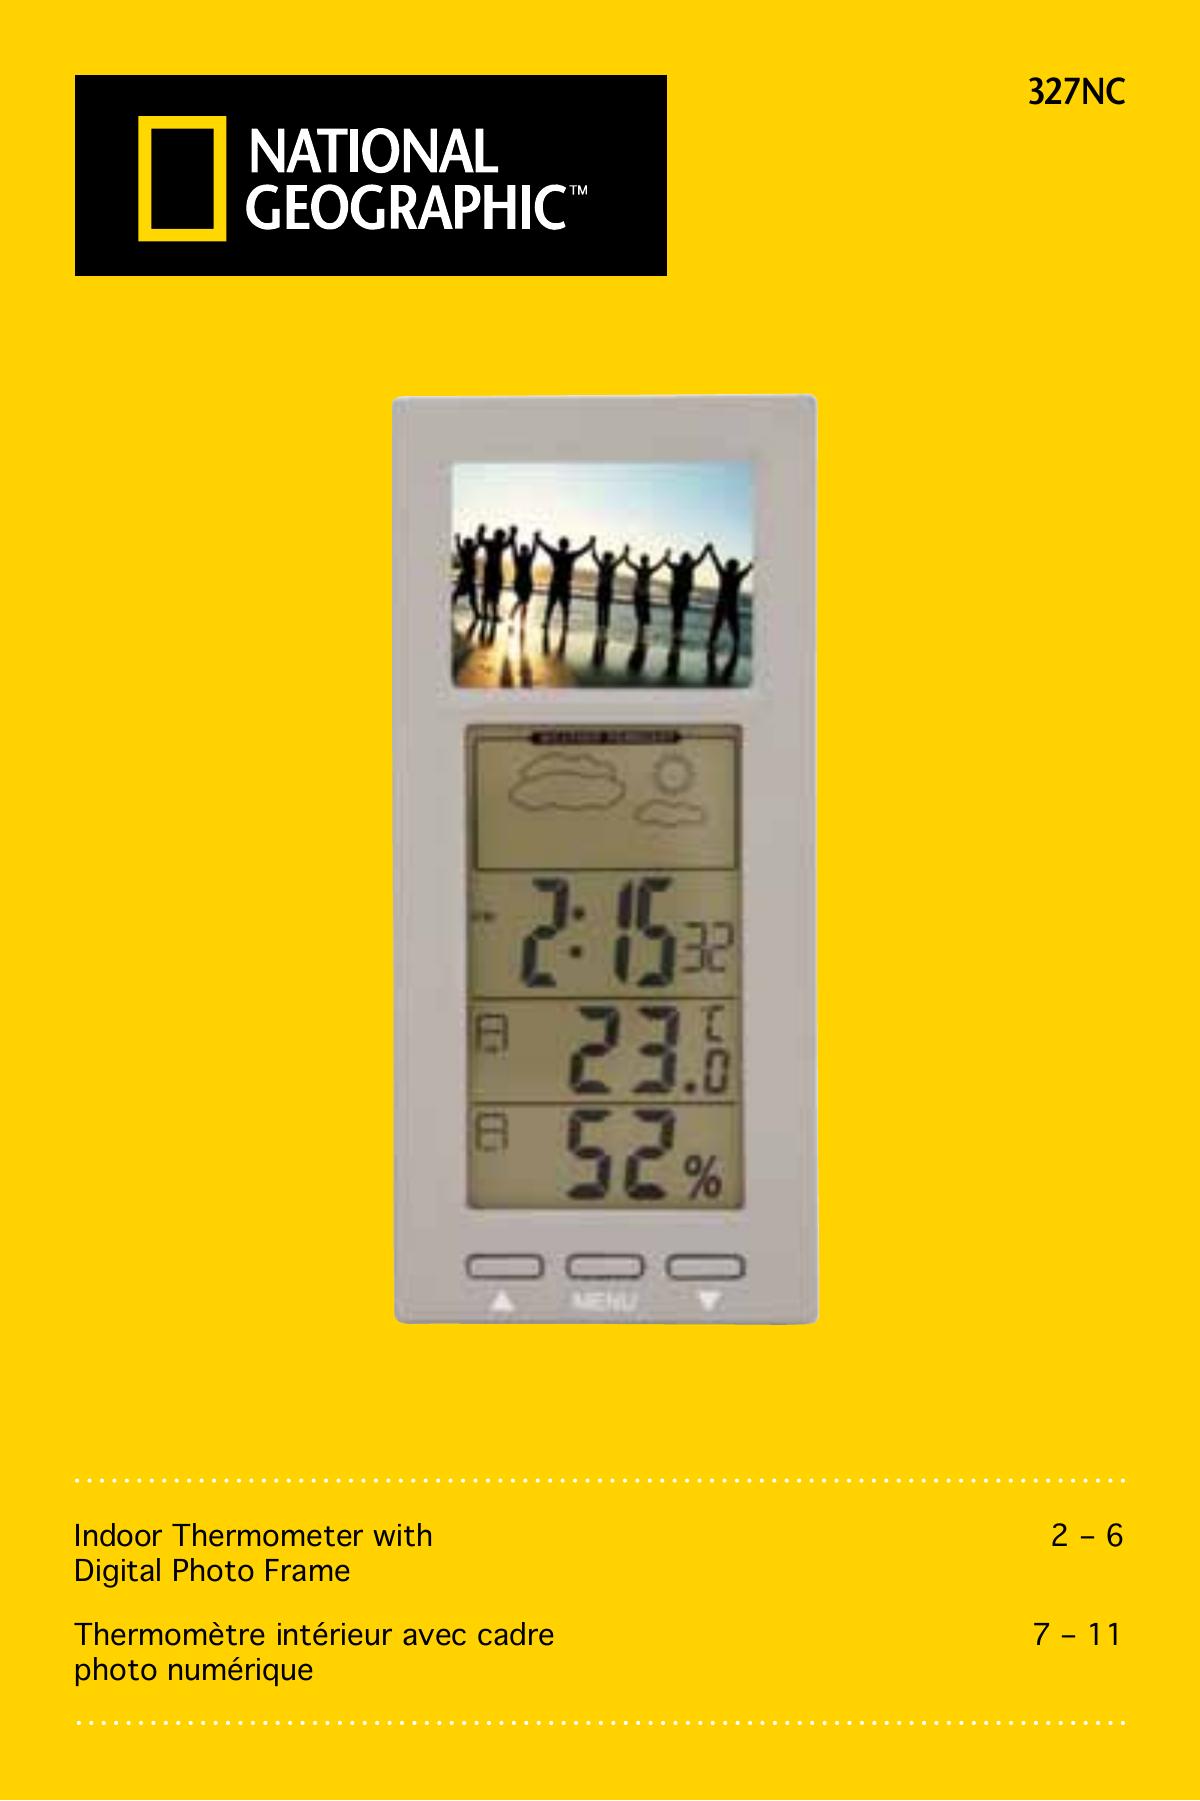 National Geographic 327nc Thermometer User Manual